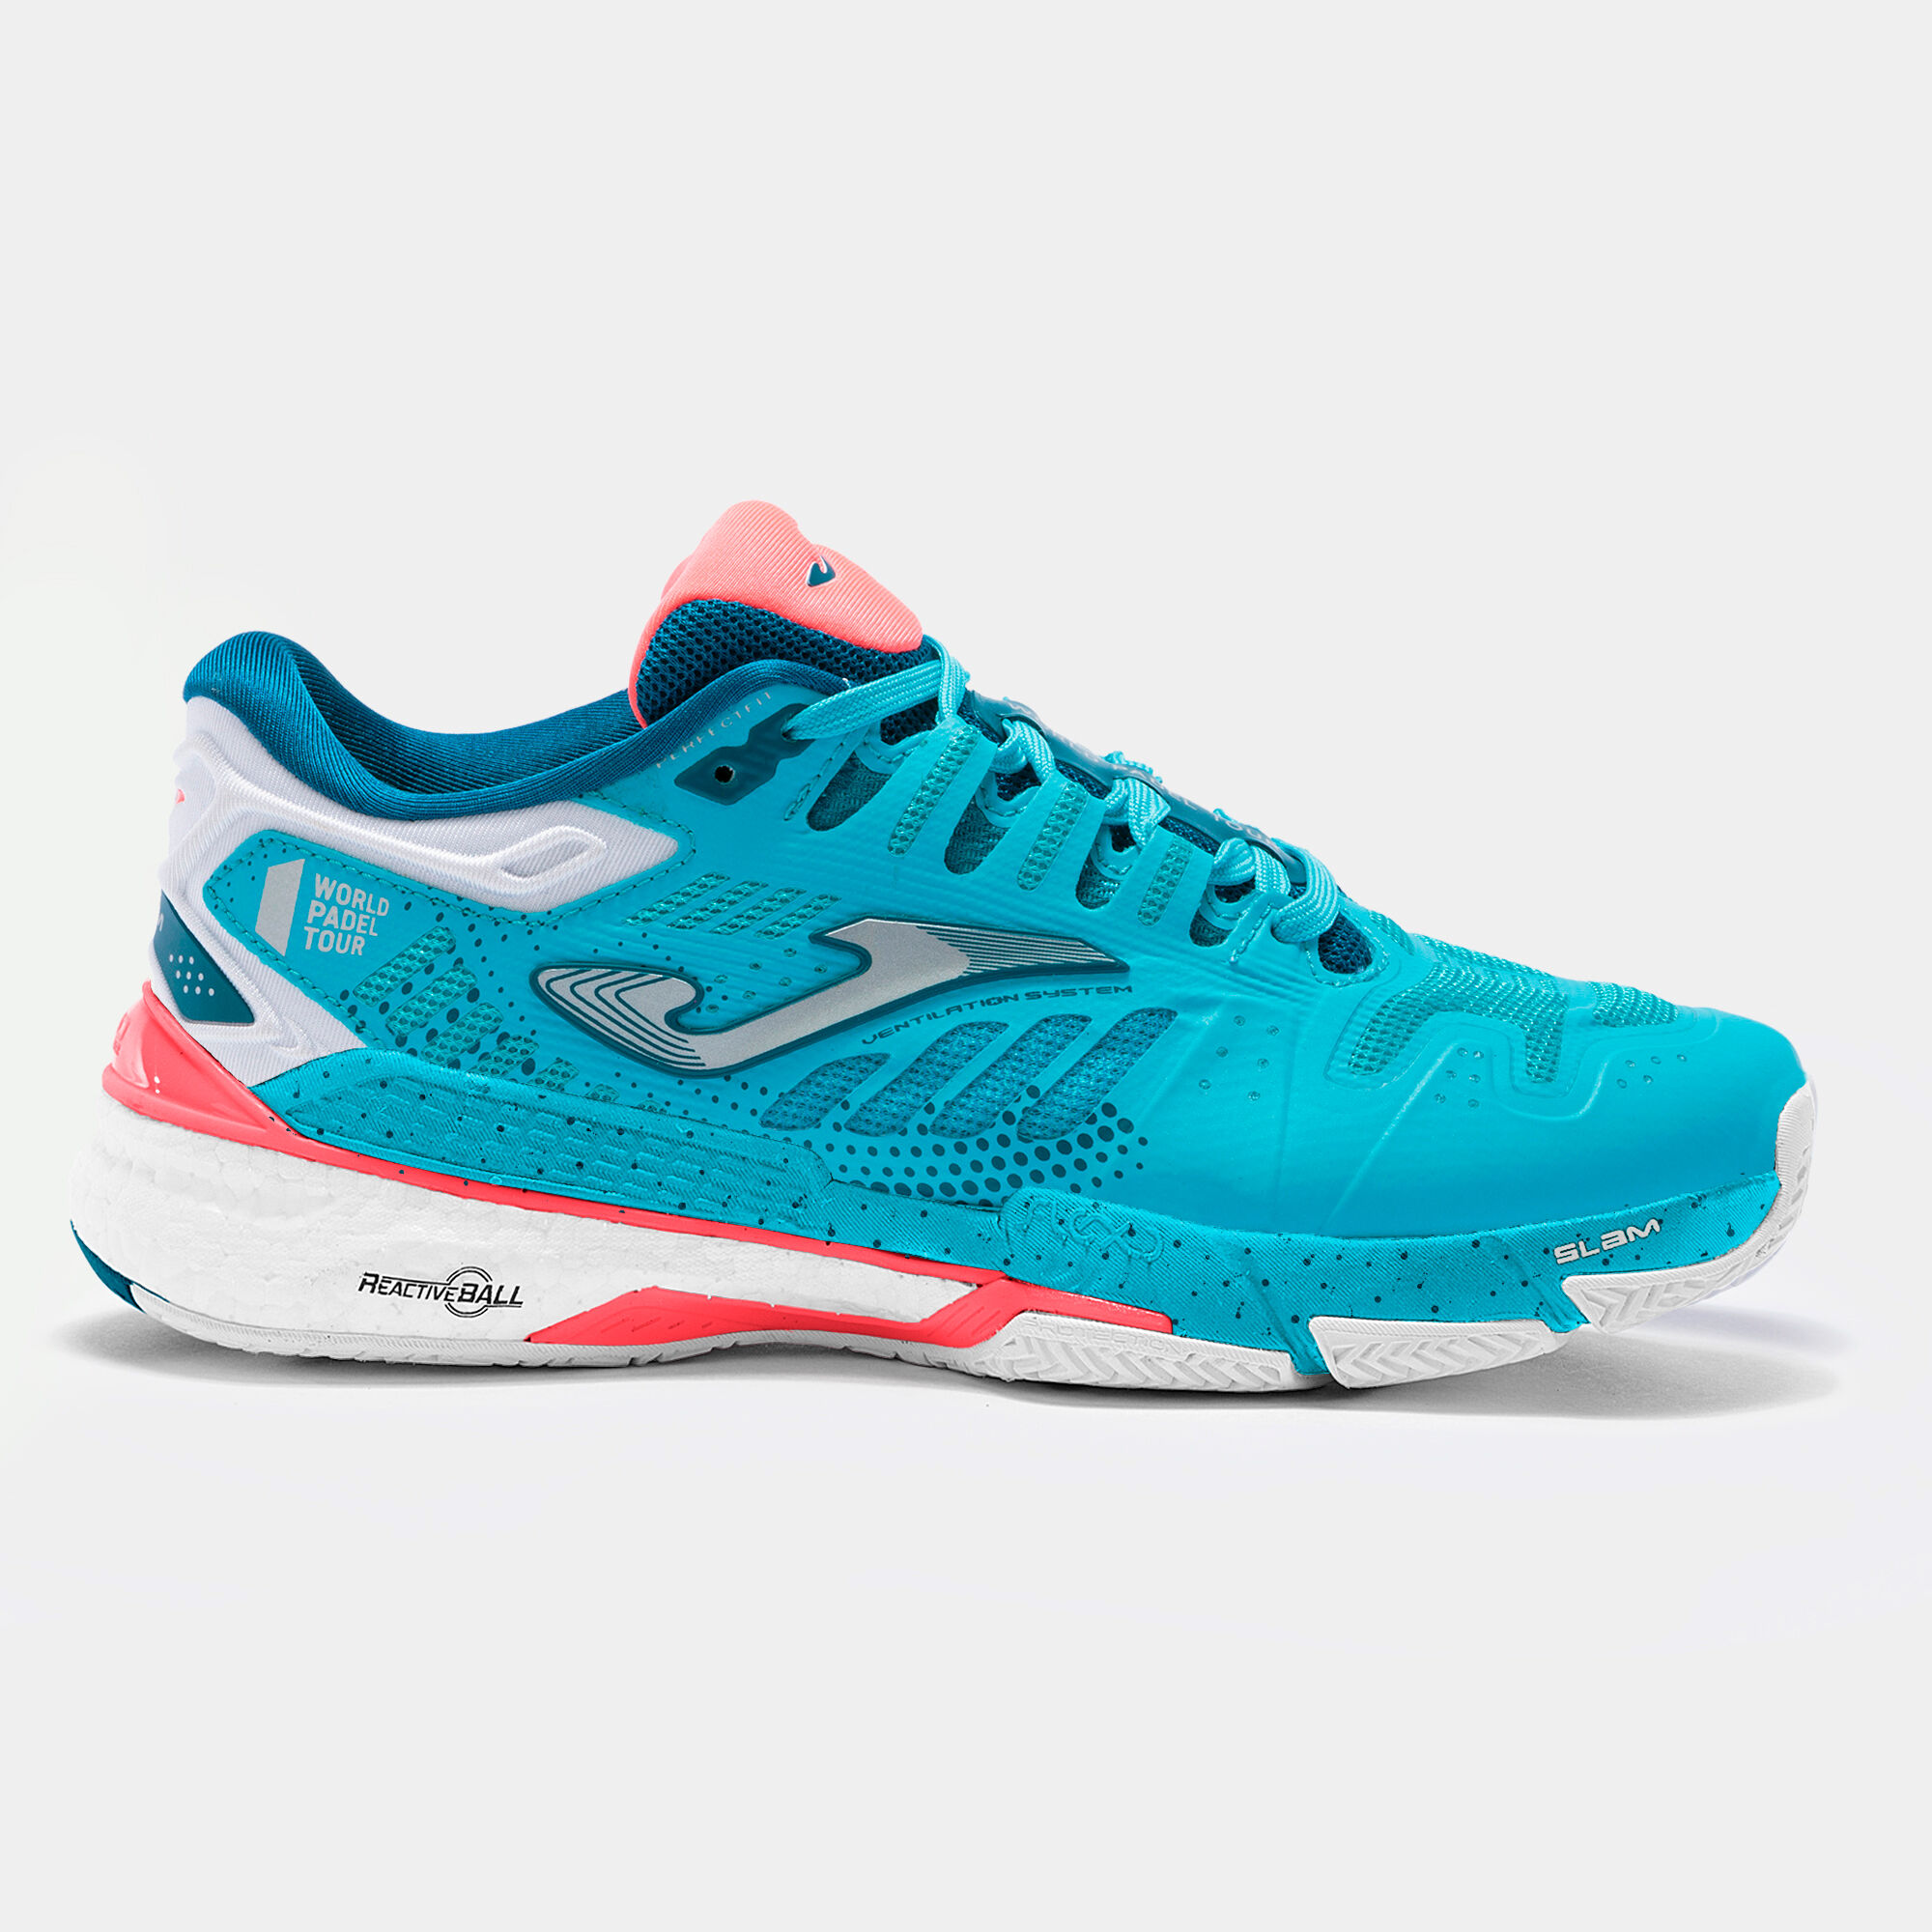 CHAUSSURES SLAM 21 TERRE BATTUE FEMME TURQUOISE